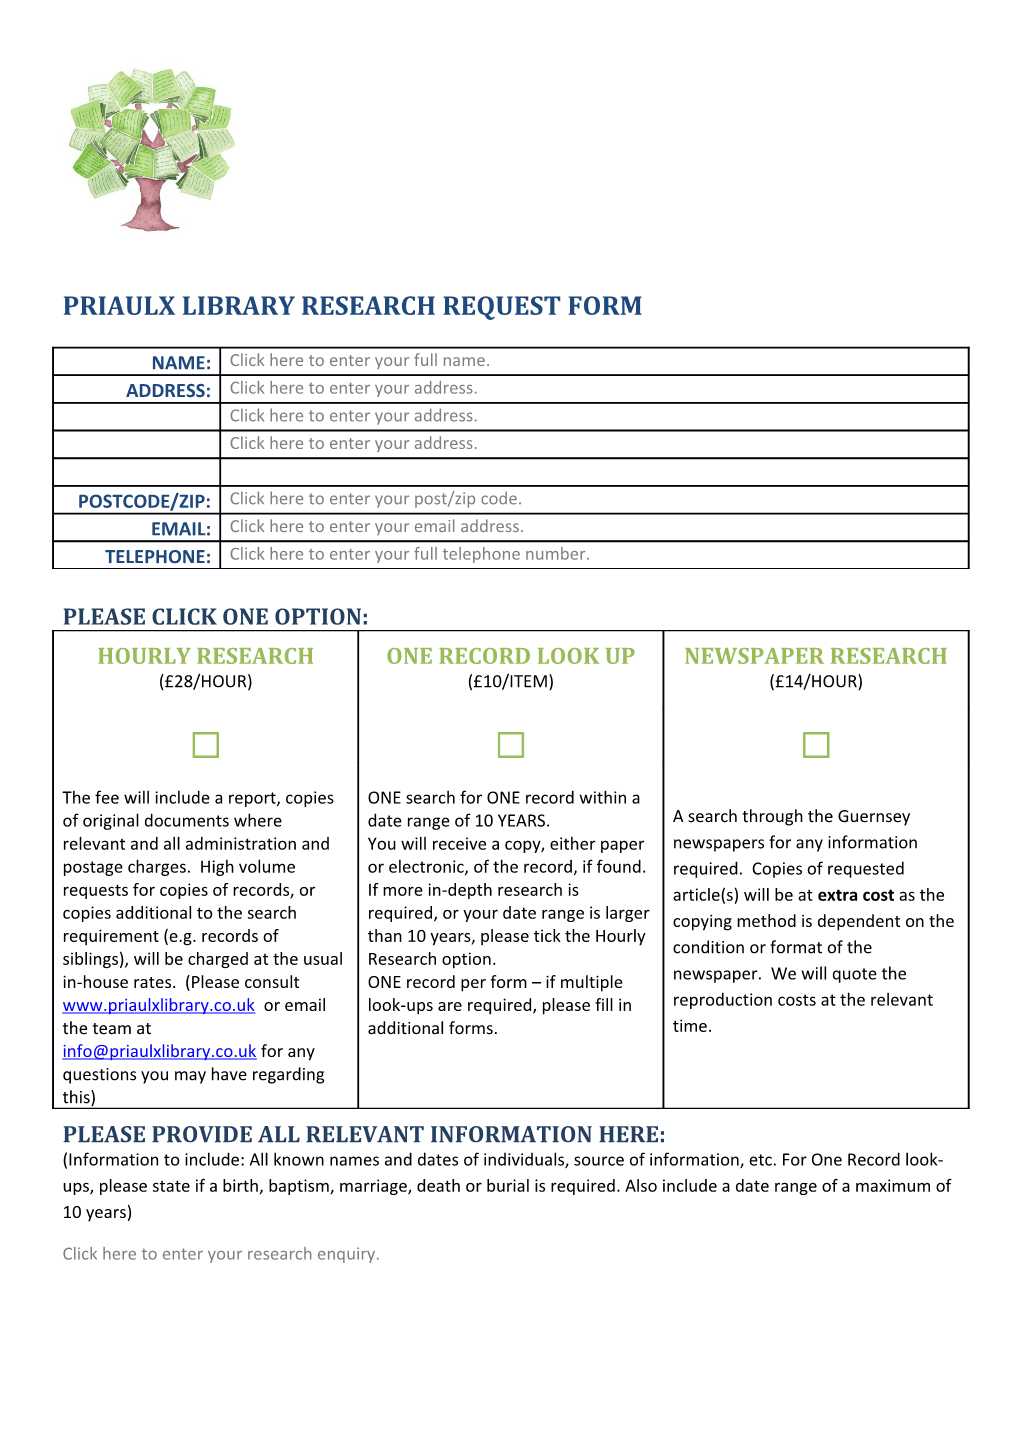 Priaulx Library Research Request Form